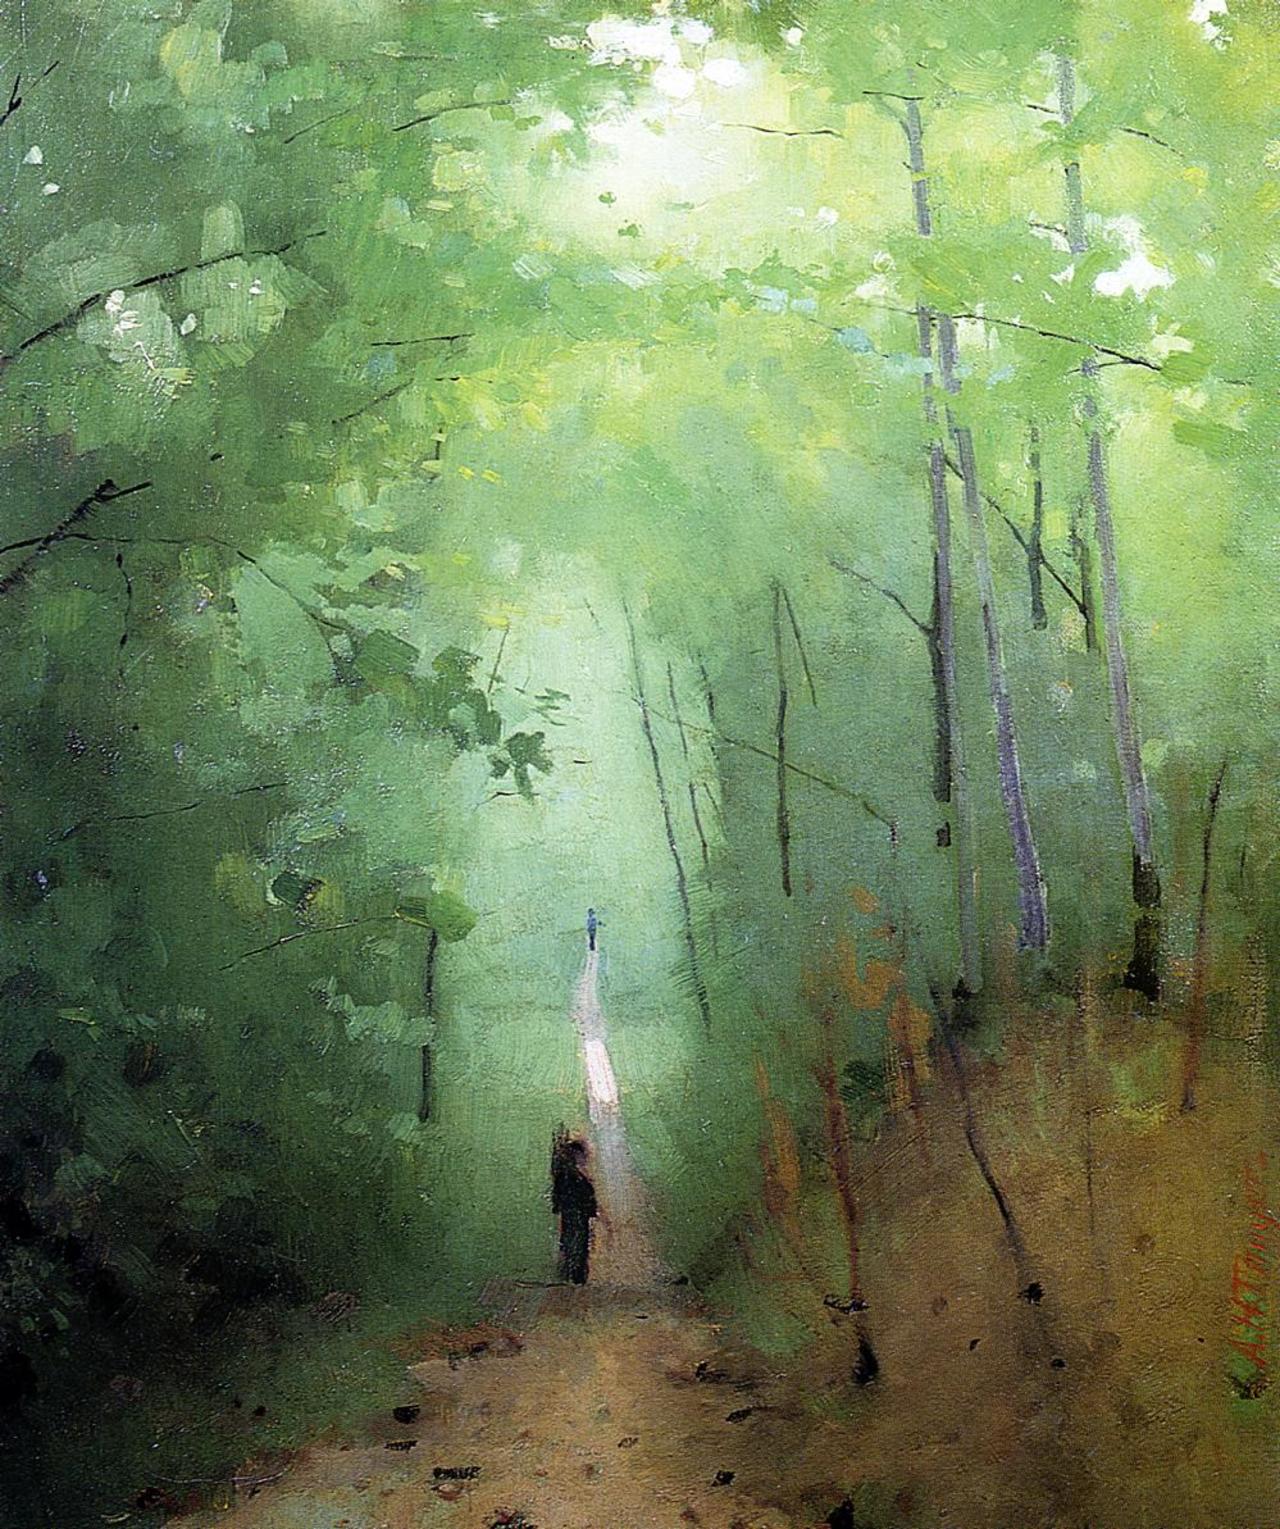 #Landscape at Fontainebleau Forest, c1876 by #American #artist Abbott Handerson Thayer #art #fineart #impressionism http://t.co/q6yeiulvRK